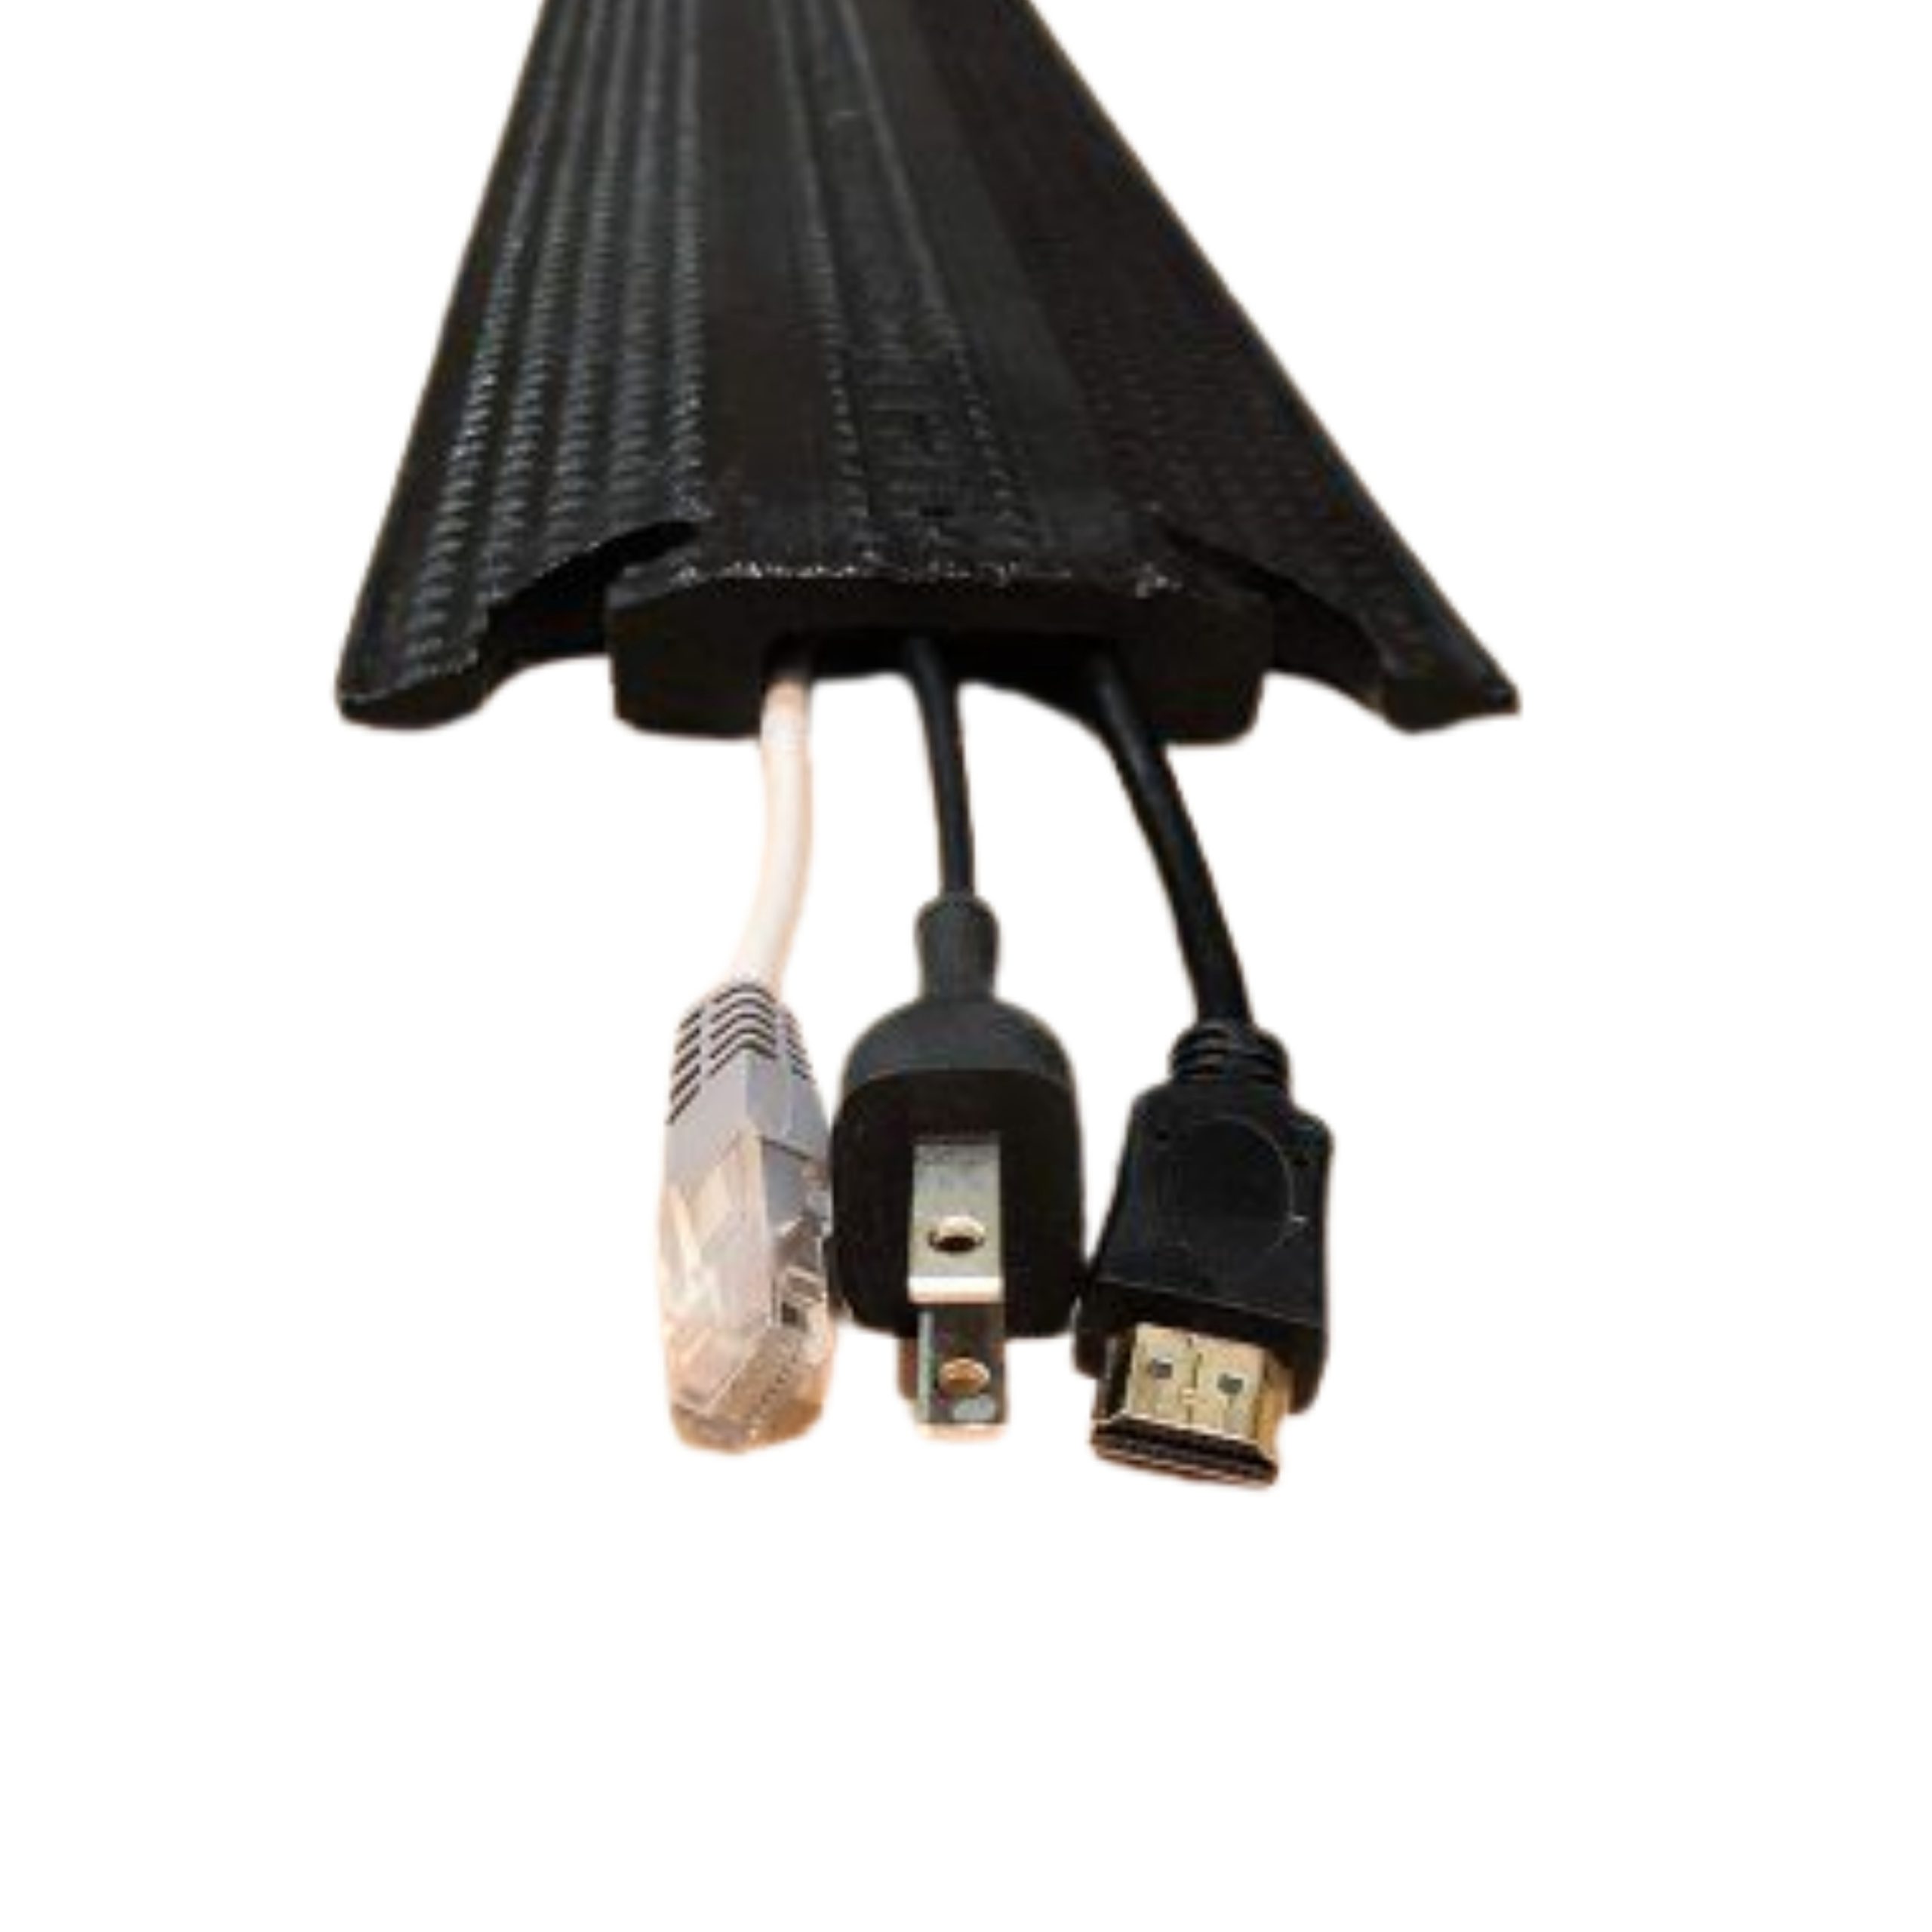 Elasco ED1050-BK Dropover, Single 1.5 inch Channel, Black, 6 pack. In  Stock. Ships Today. - Cable Protector Works - Elasco Wheel Chocks, Cable  Protectors and Cable Ramps %